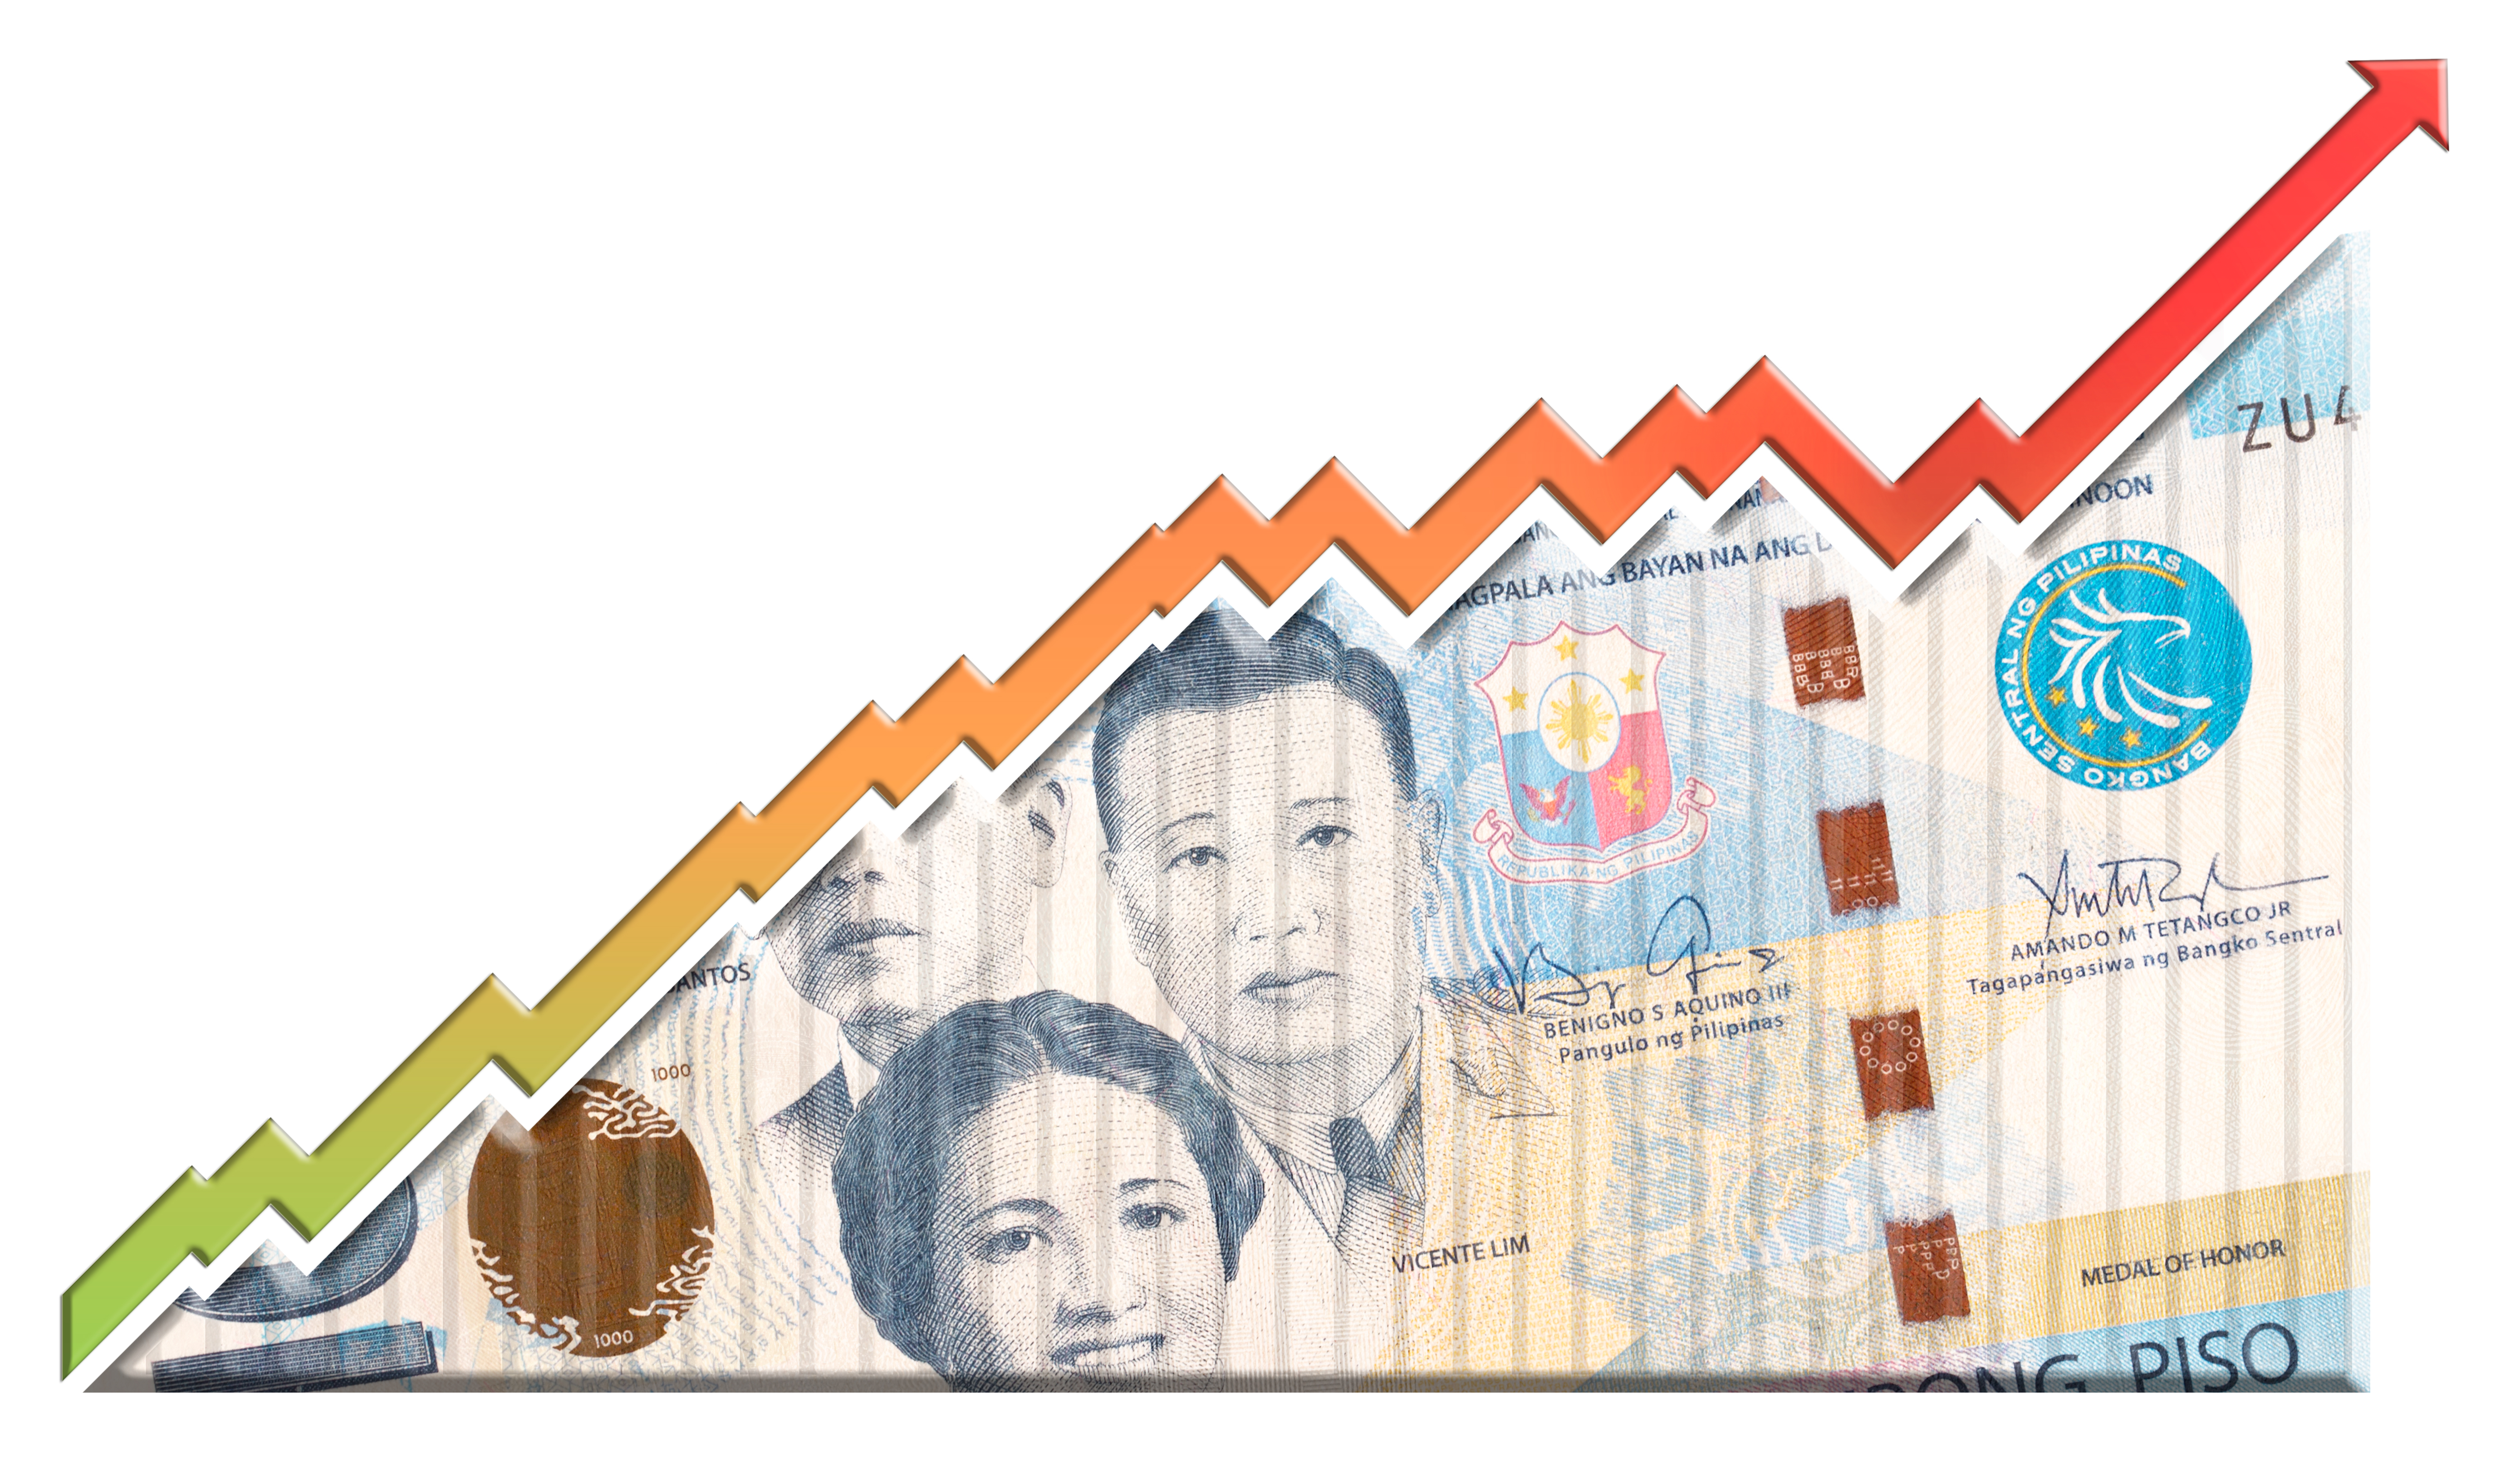 How To Keep The Philippine Economic Future On Track The World Financial Review